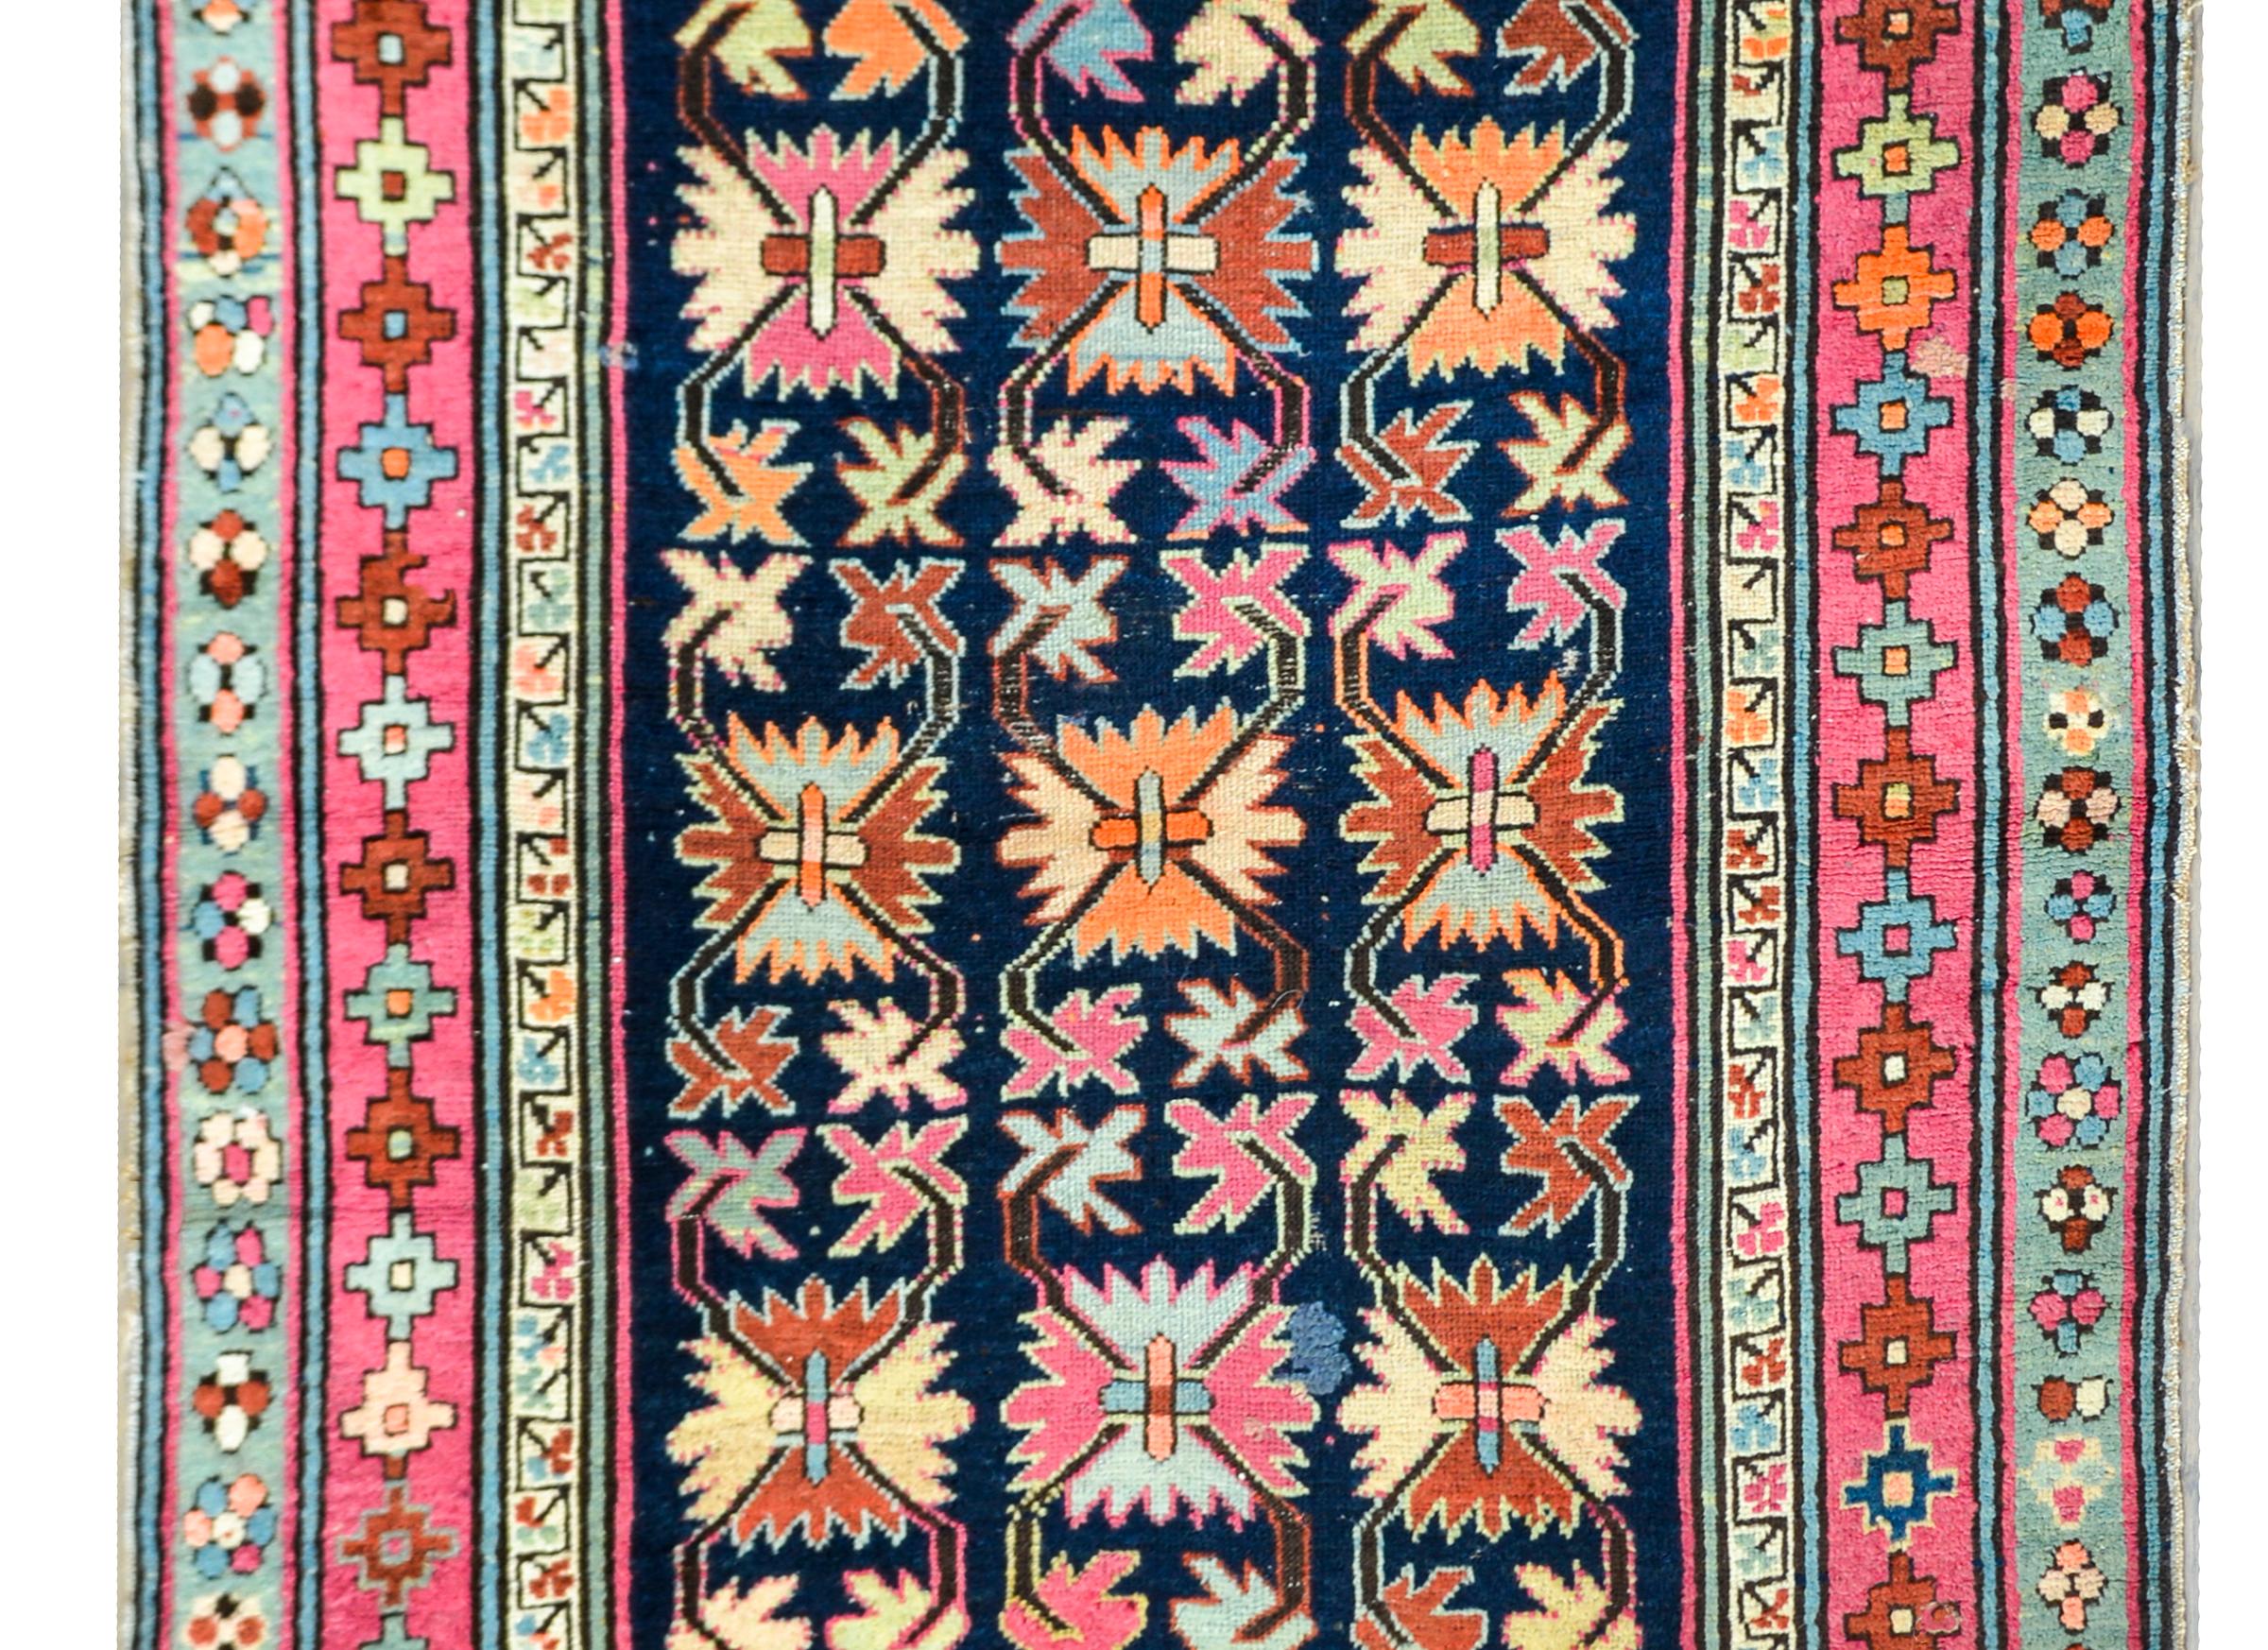 A gorgeous and rare early 20th century Persian Ganjeh prayer rug with the most beautiful stylized floral and leaf pattern woven in wonderful bright pinks, oranges, yellows, blues, fuchsias, and greens, set against a dark indigo background. The